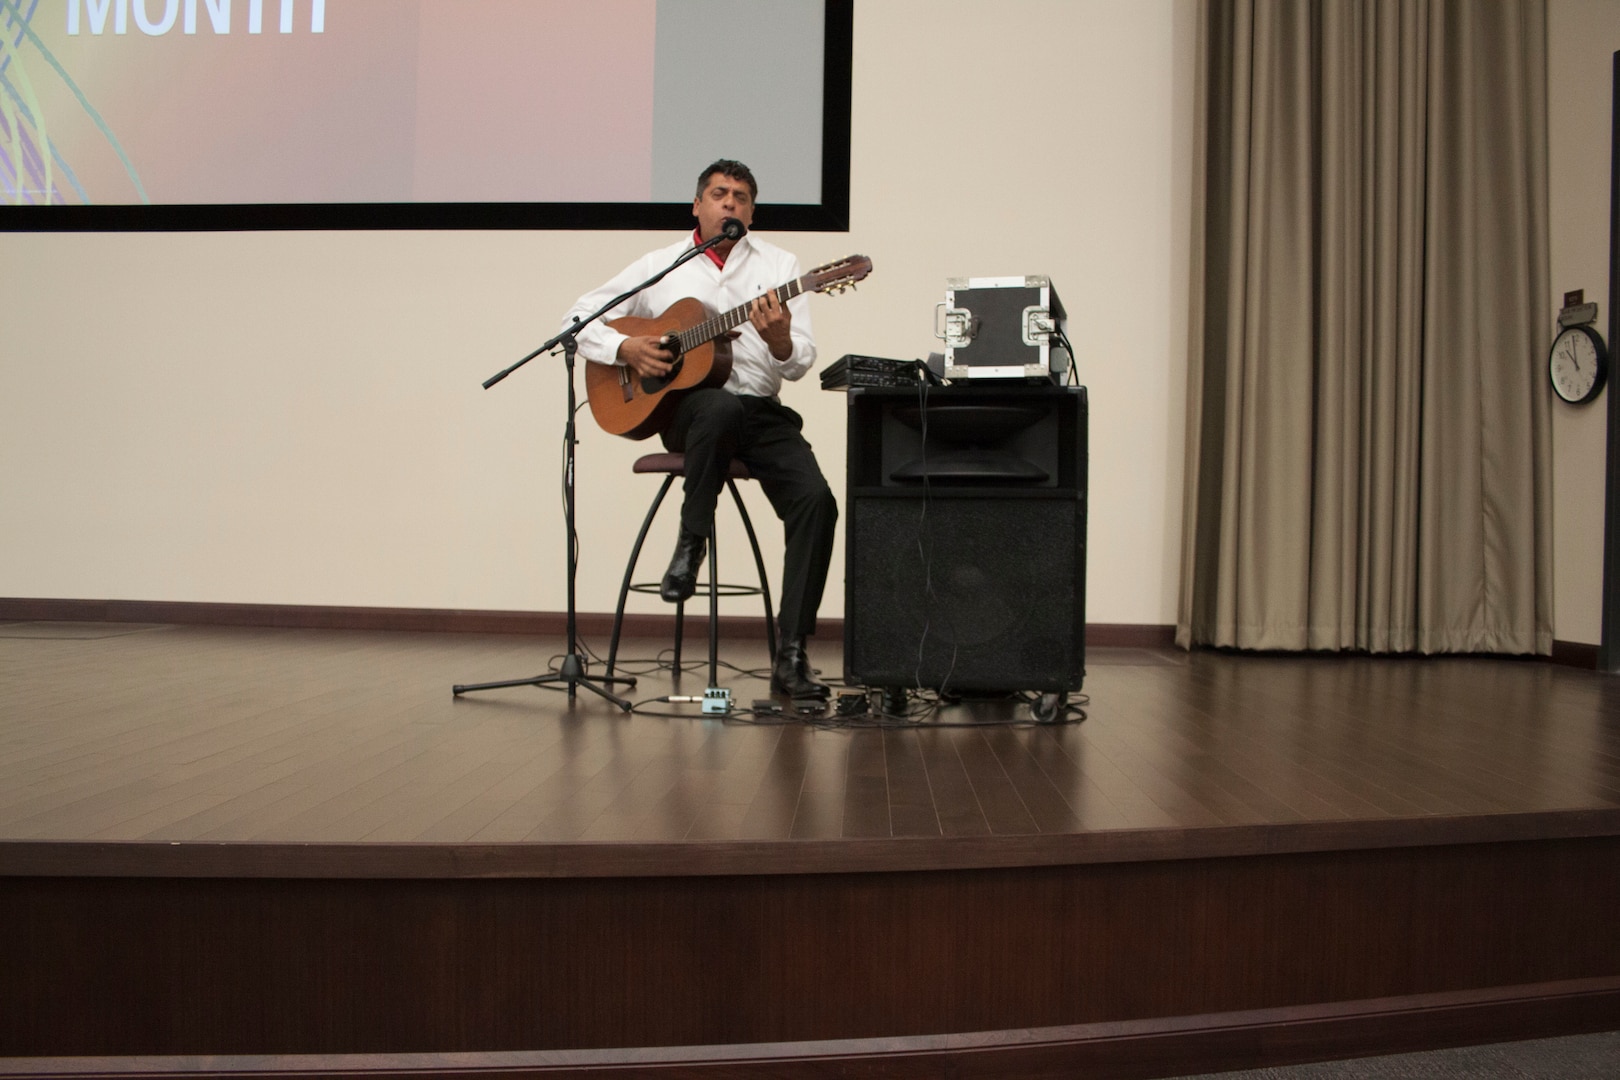 Dante Sobrevilla performs a medley of songs from different Hispanic countries during the Hispanic Heritage Month event at DLA Distribution Headquarters on Sept. 20.